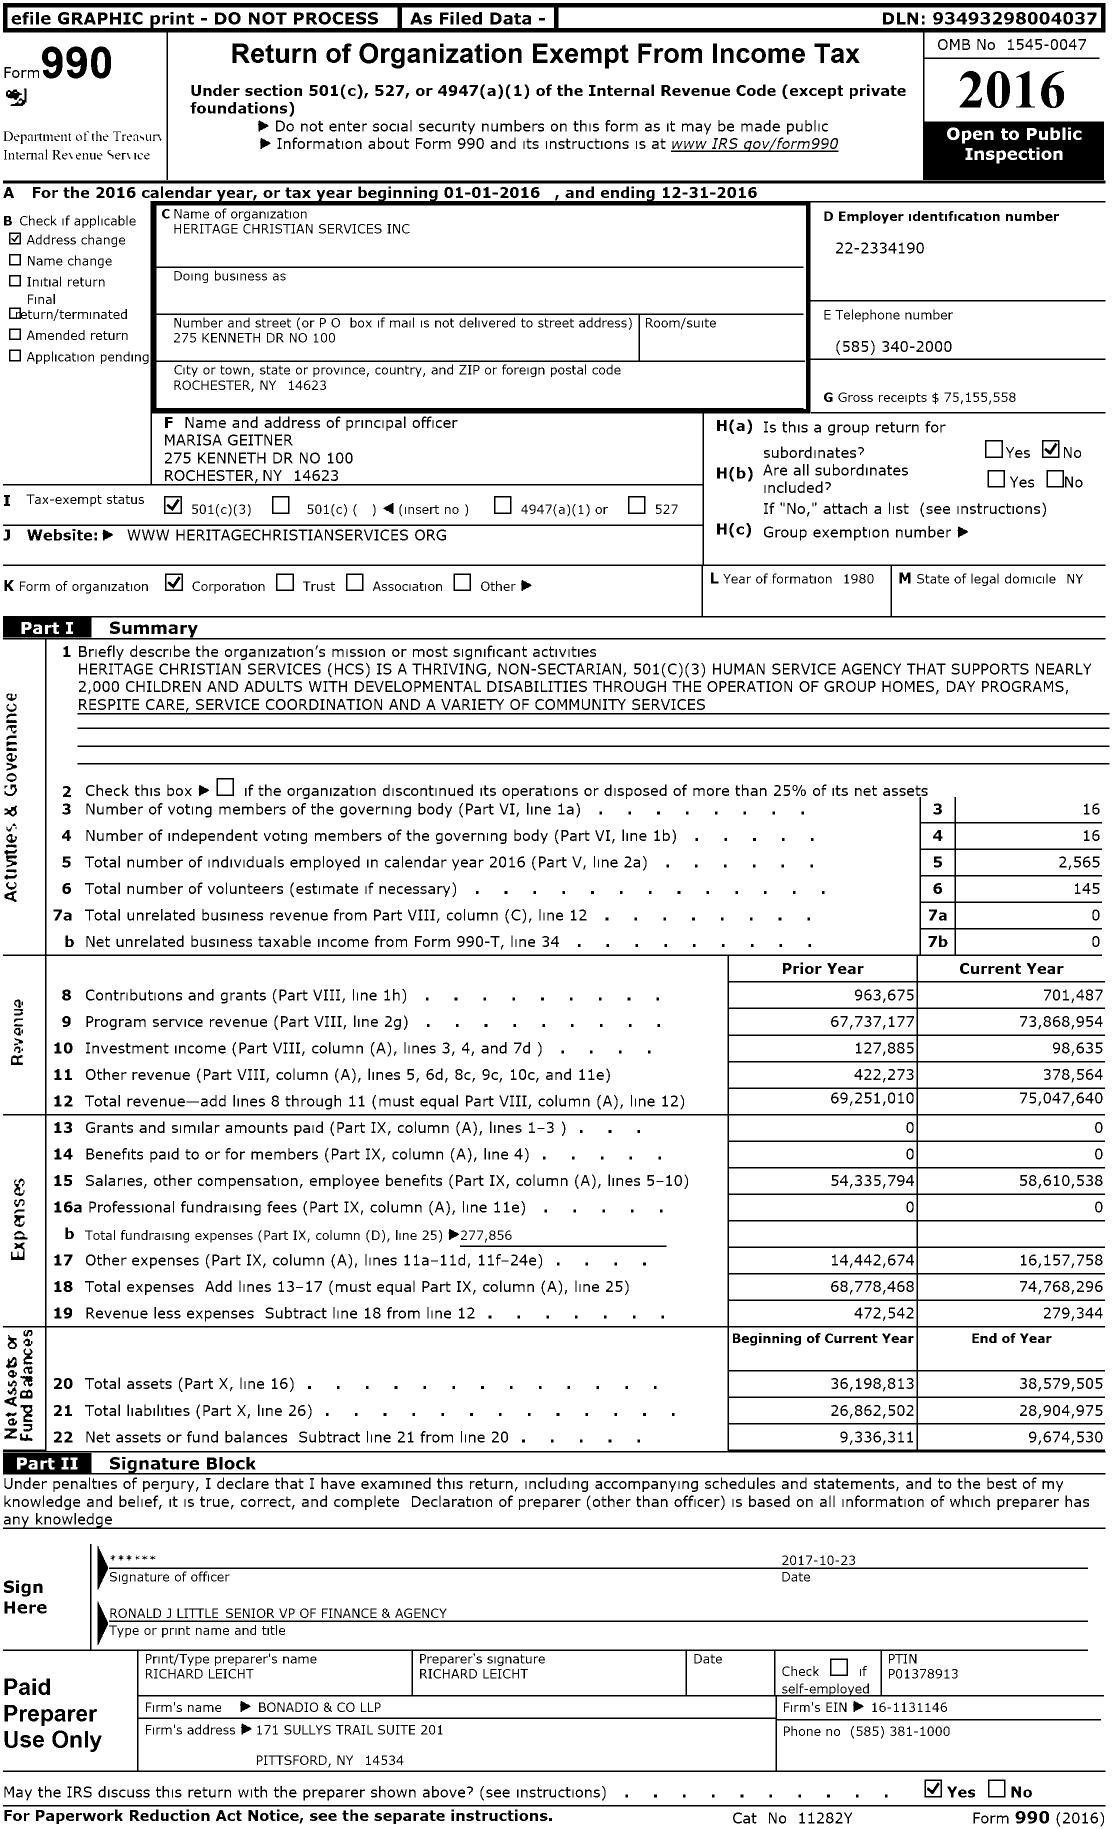 Image of first page of 2016 Form 990 for Heritage Christian Services (HCS)